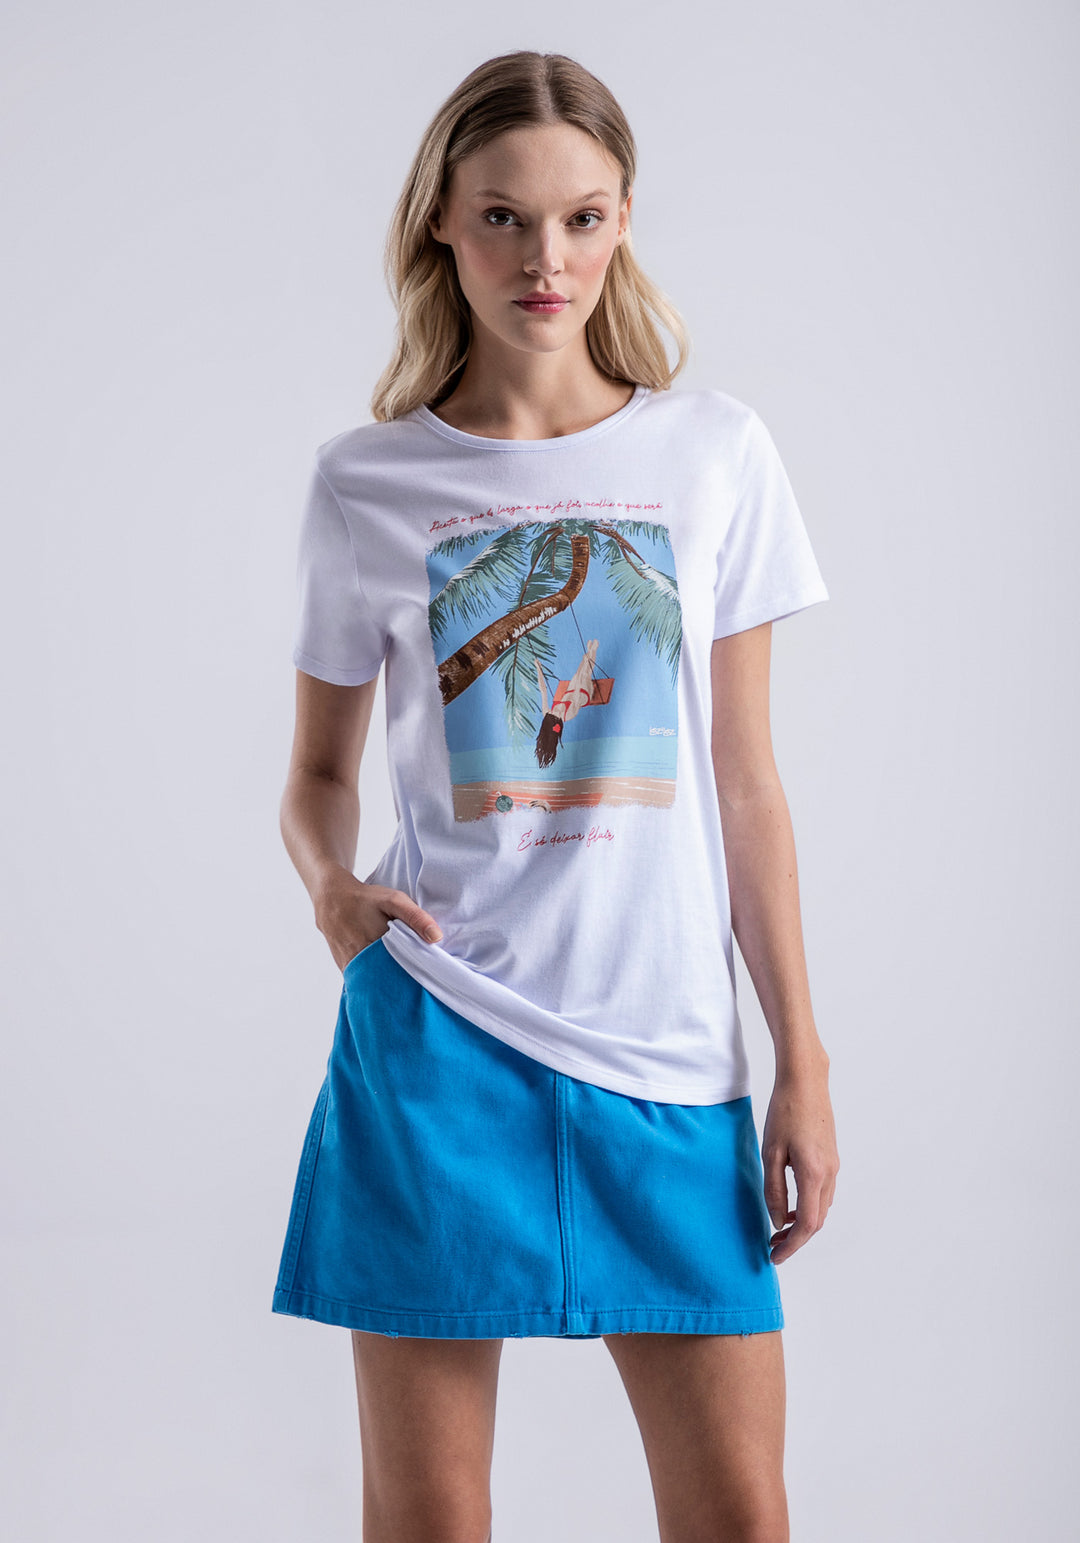 Vacation Vibes Graphic Tee - White | Lez A Lez - Clearance